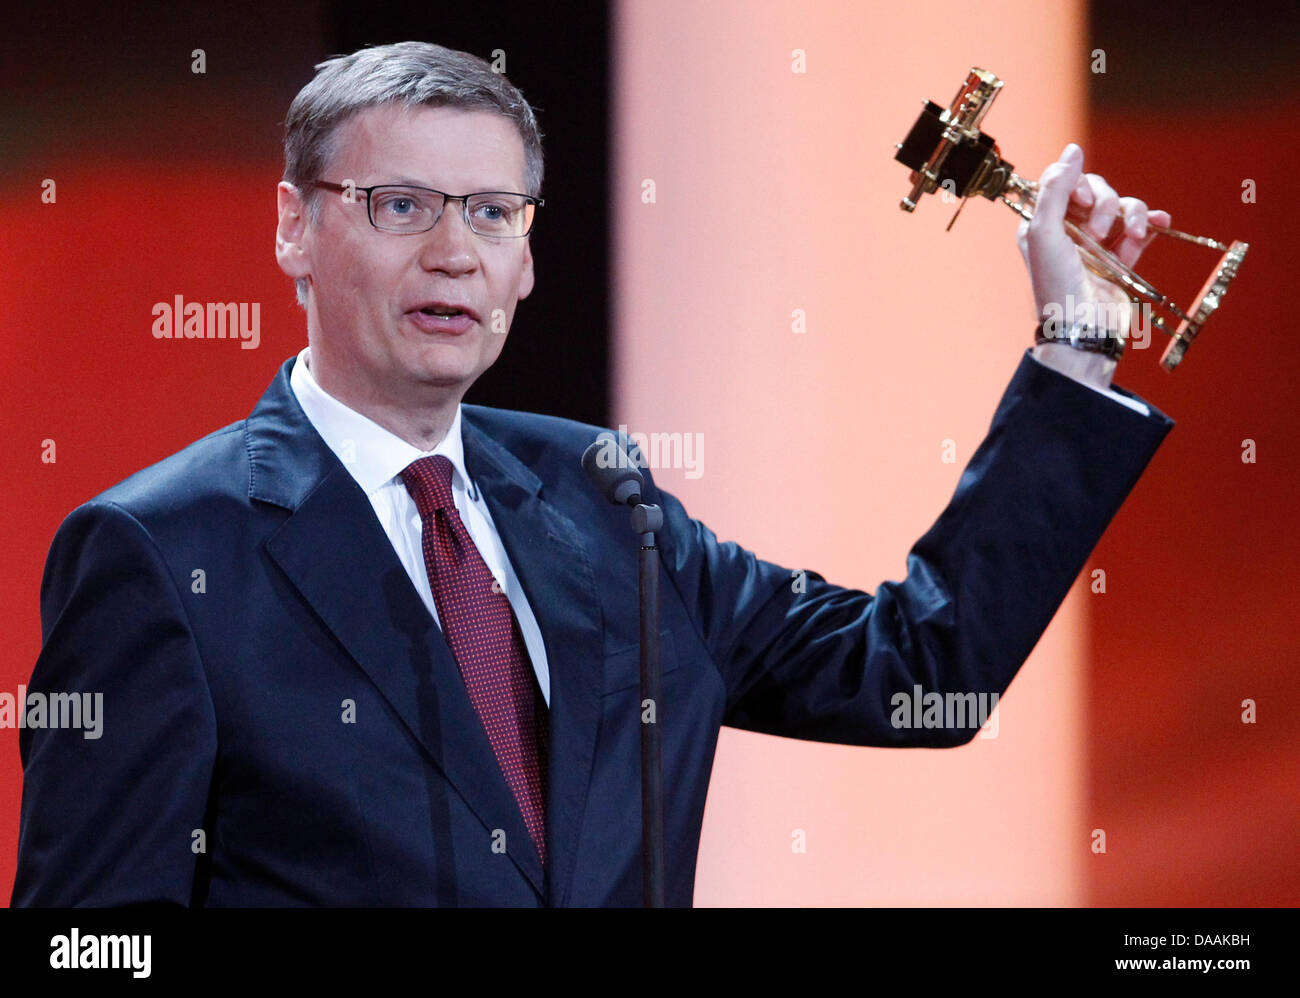 German TV presenter and game show host Guenther Jauch holds his trophy for best national TV entertainer during the 46th Golden Camera award ceremony in Berlin, Germany, 5 February 2011. The award honours the audience's favourites from film, television, sports and media. Photo: Tobias Schwarz dpa/lbn Stock Photo